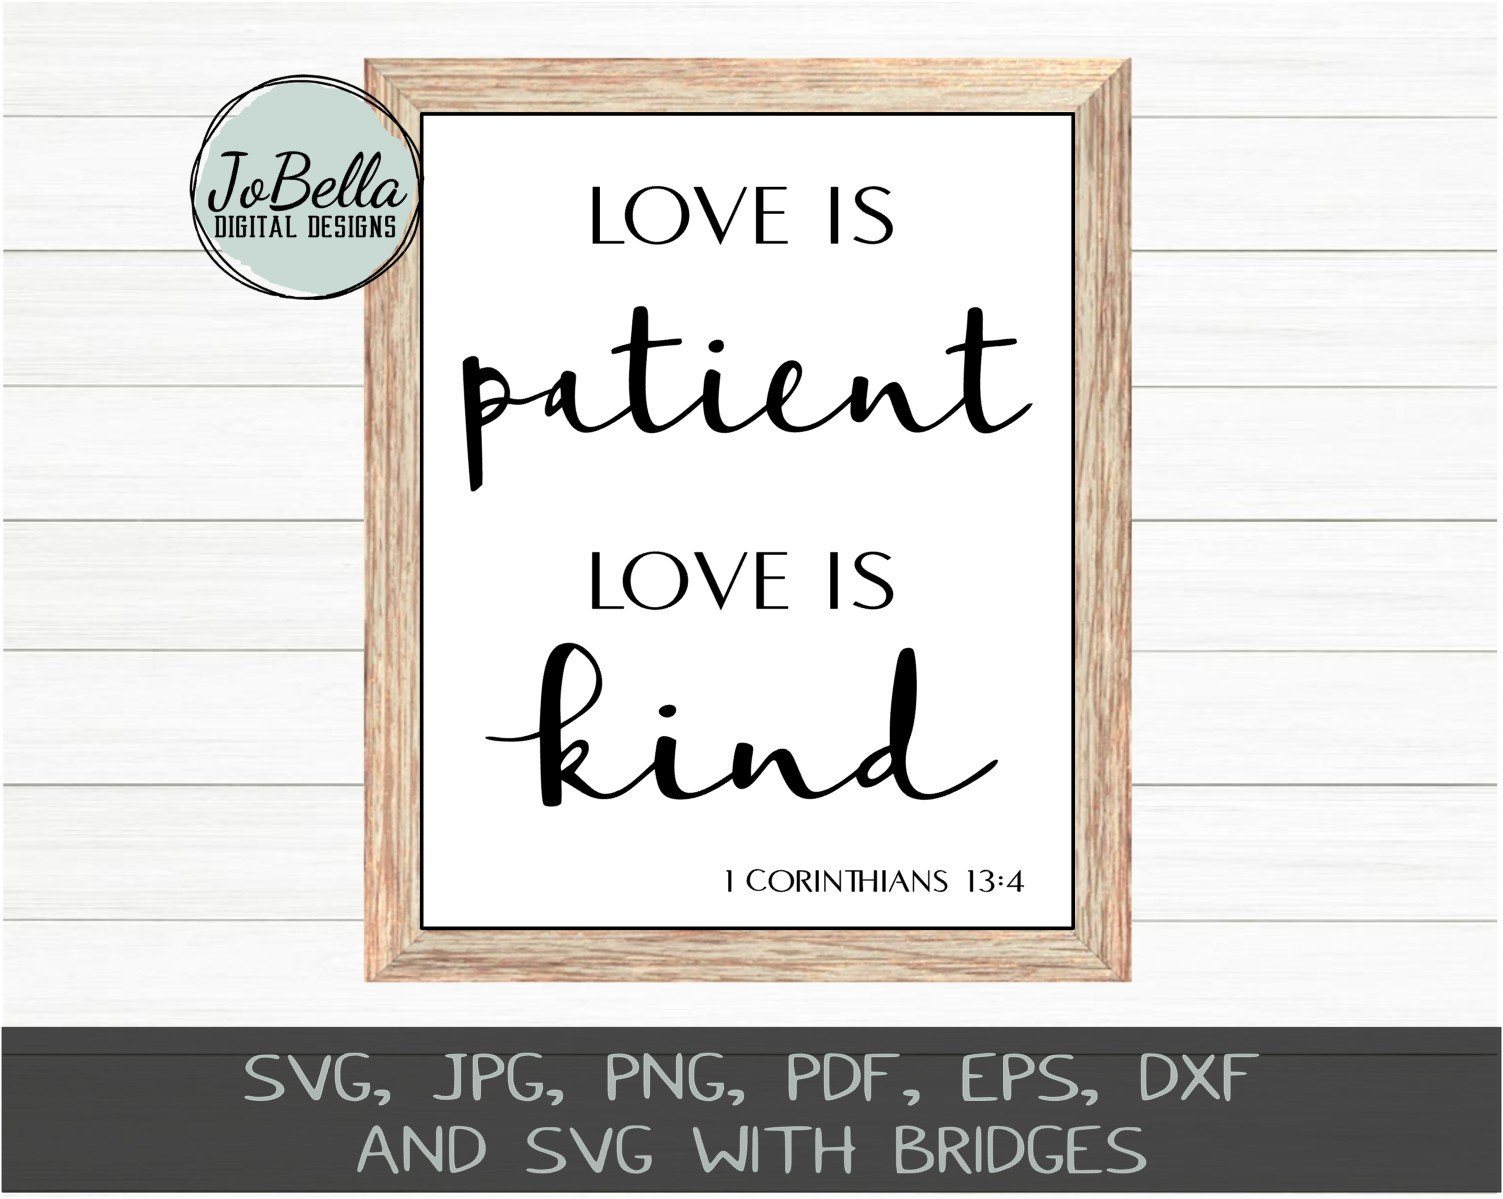 Download Clip Art Art Collectibles Love Is Patient Svg Romantic Quote Svg Valentine S Day Svg Anniversary Sign Clip Art Png Love Is Kind Svg Over The Bed Sign Svg Jpeg